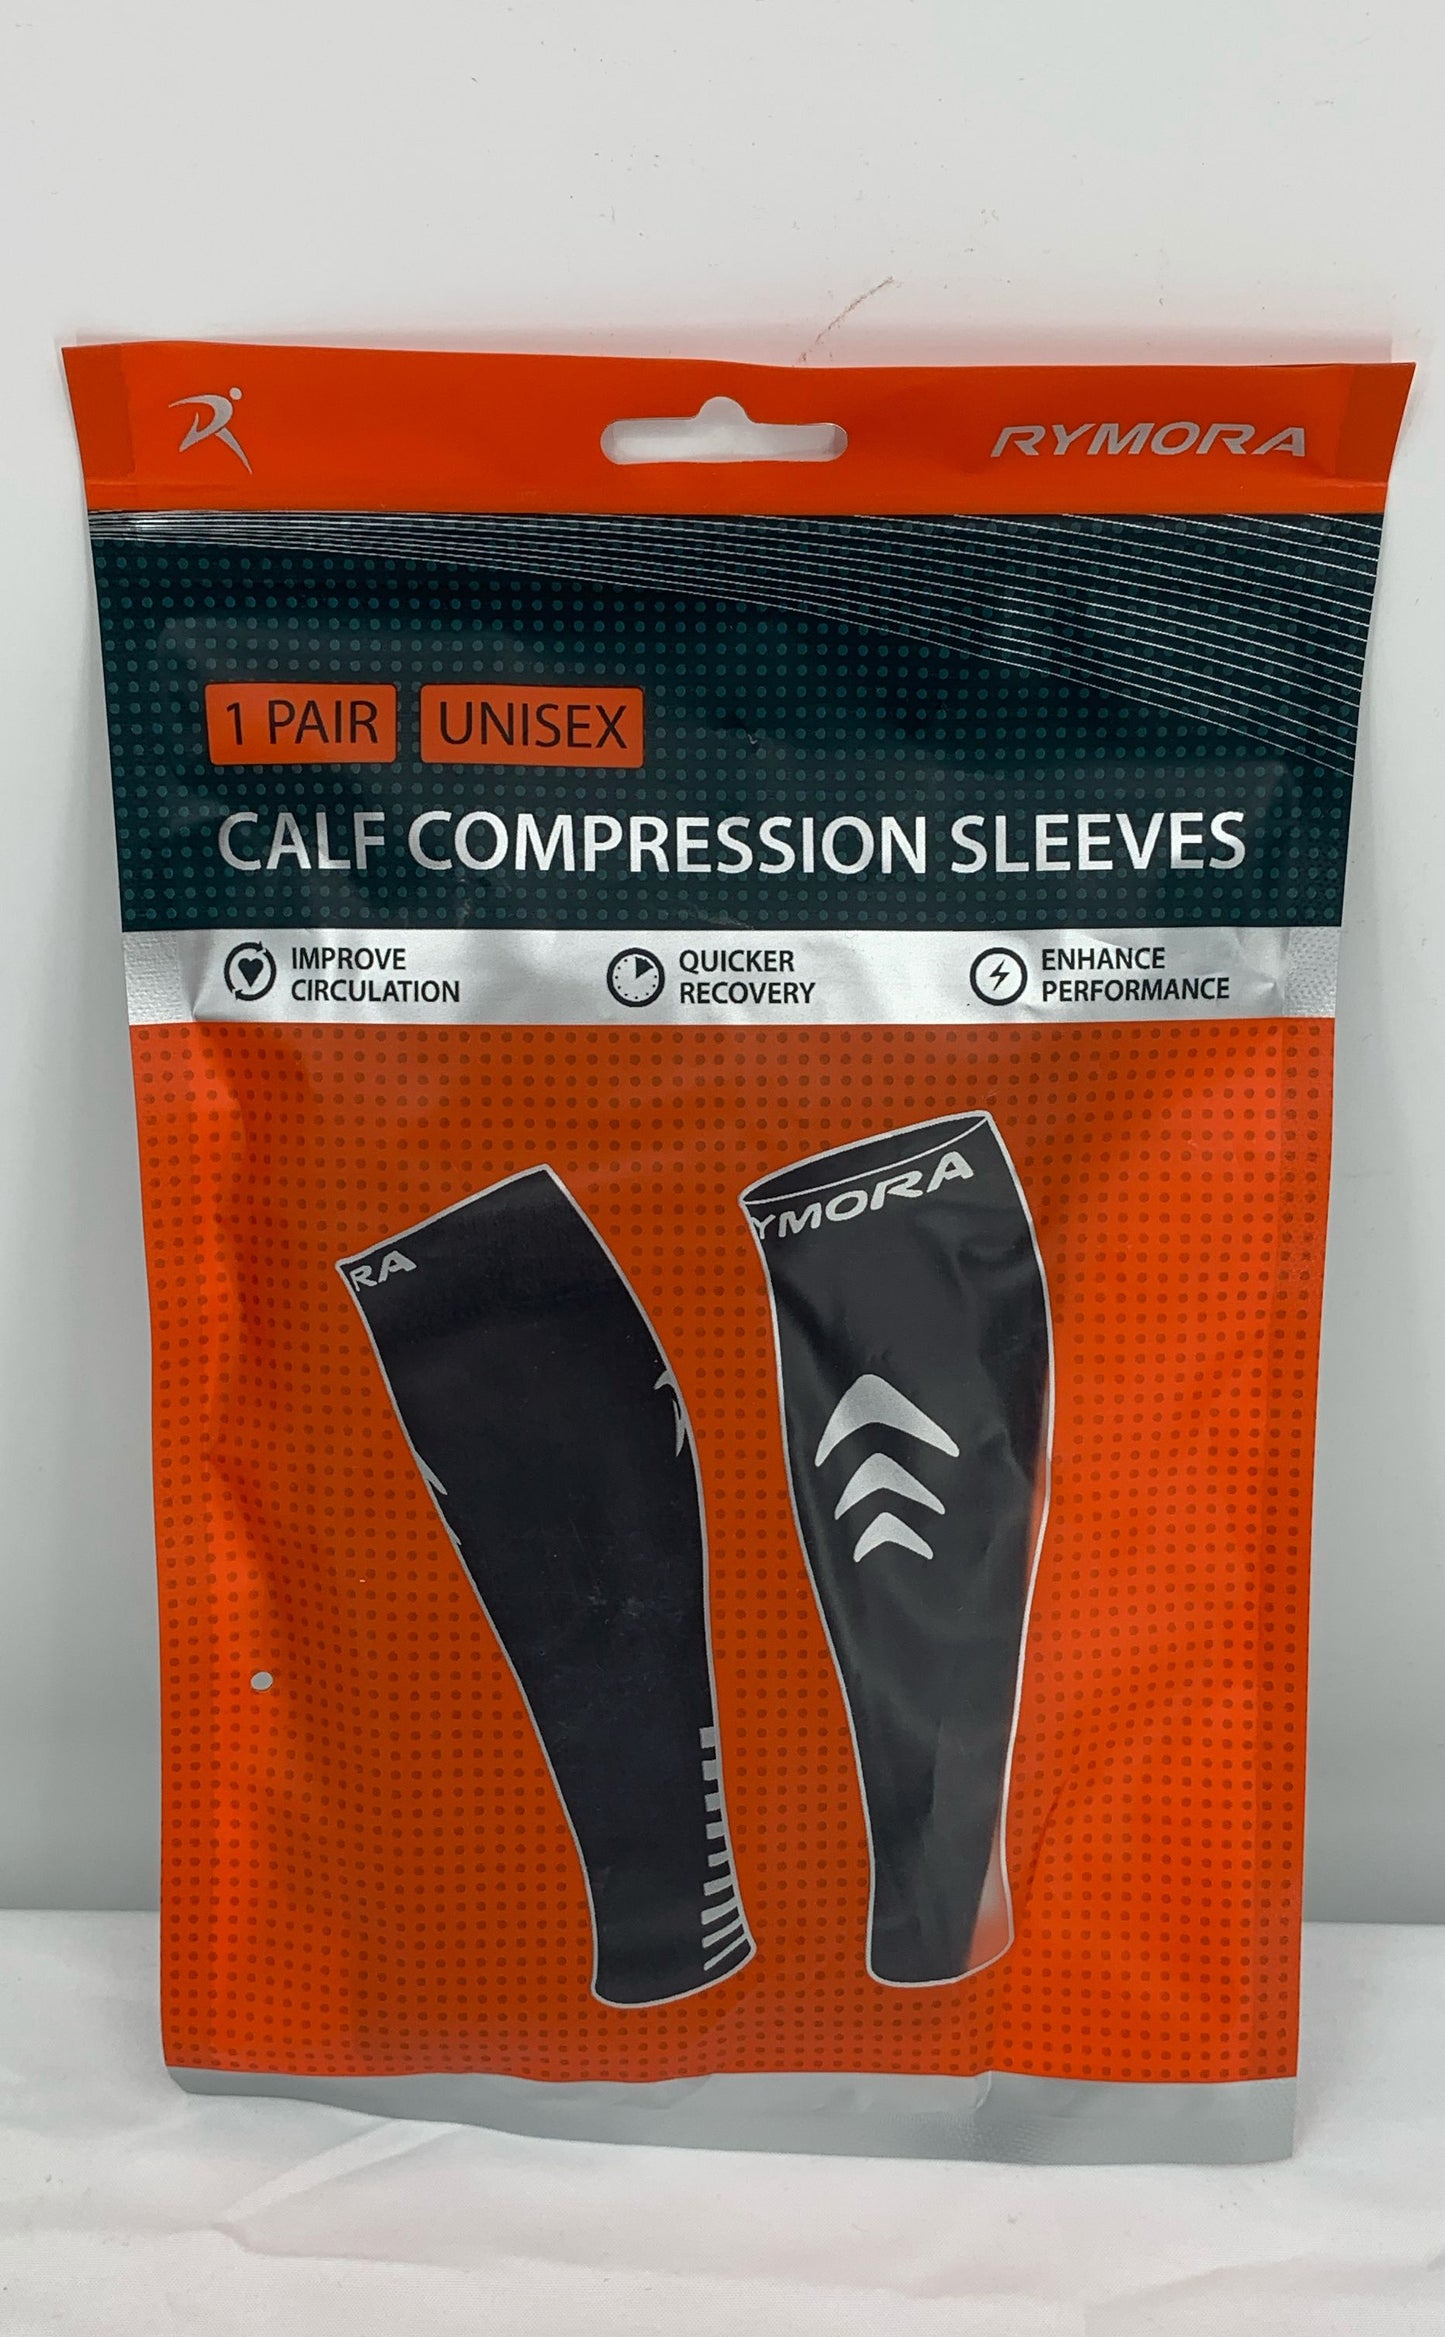 New RYMORA-1 Pair Unisex Calf Compression Sleeves-New In Package-One Size